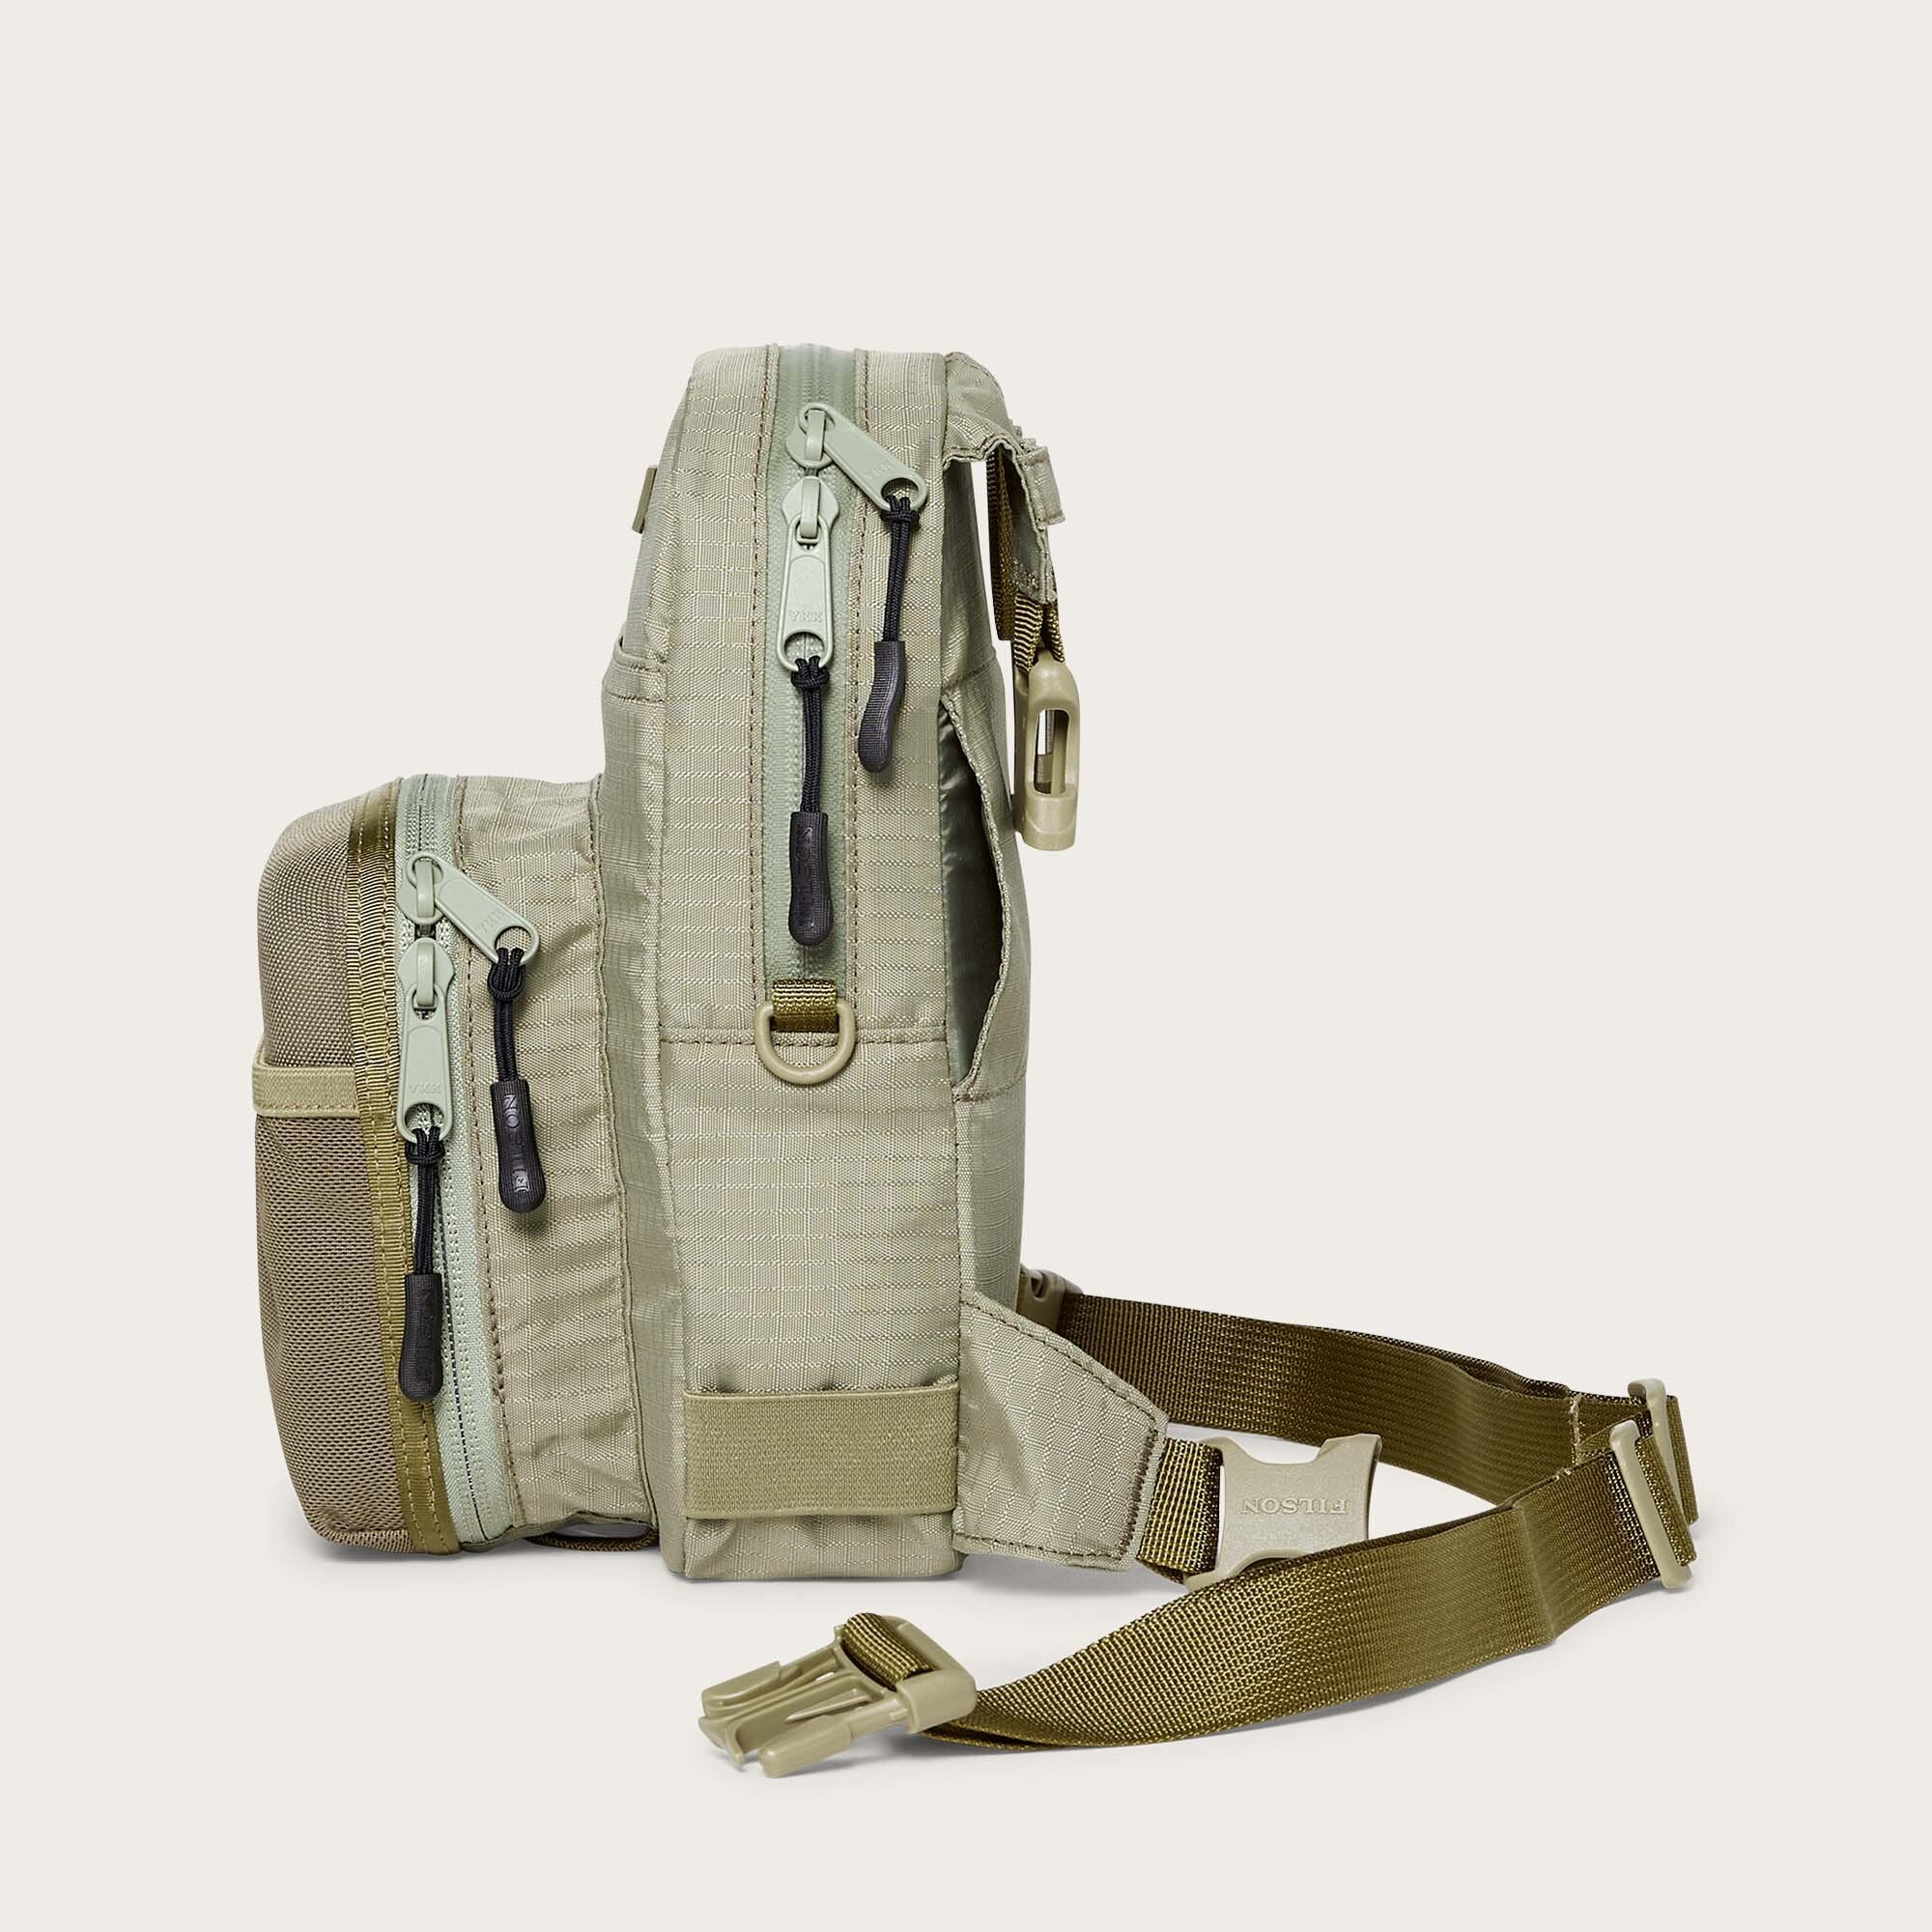 Filson 100% Waterproof Fly Fishing Bag - No Gear Included – Rigged